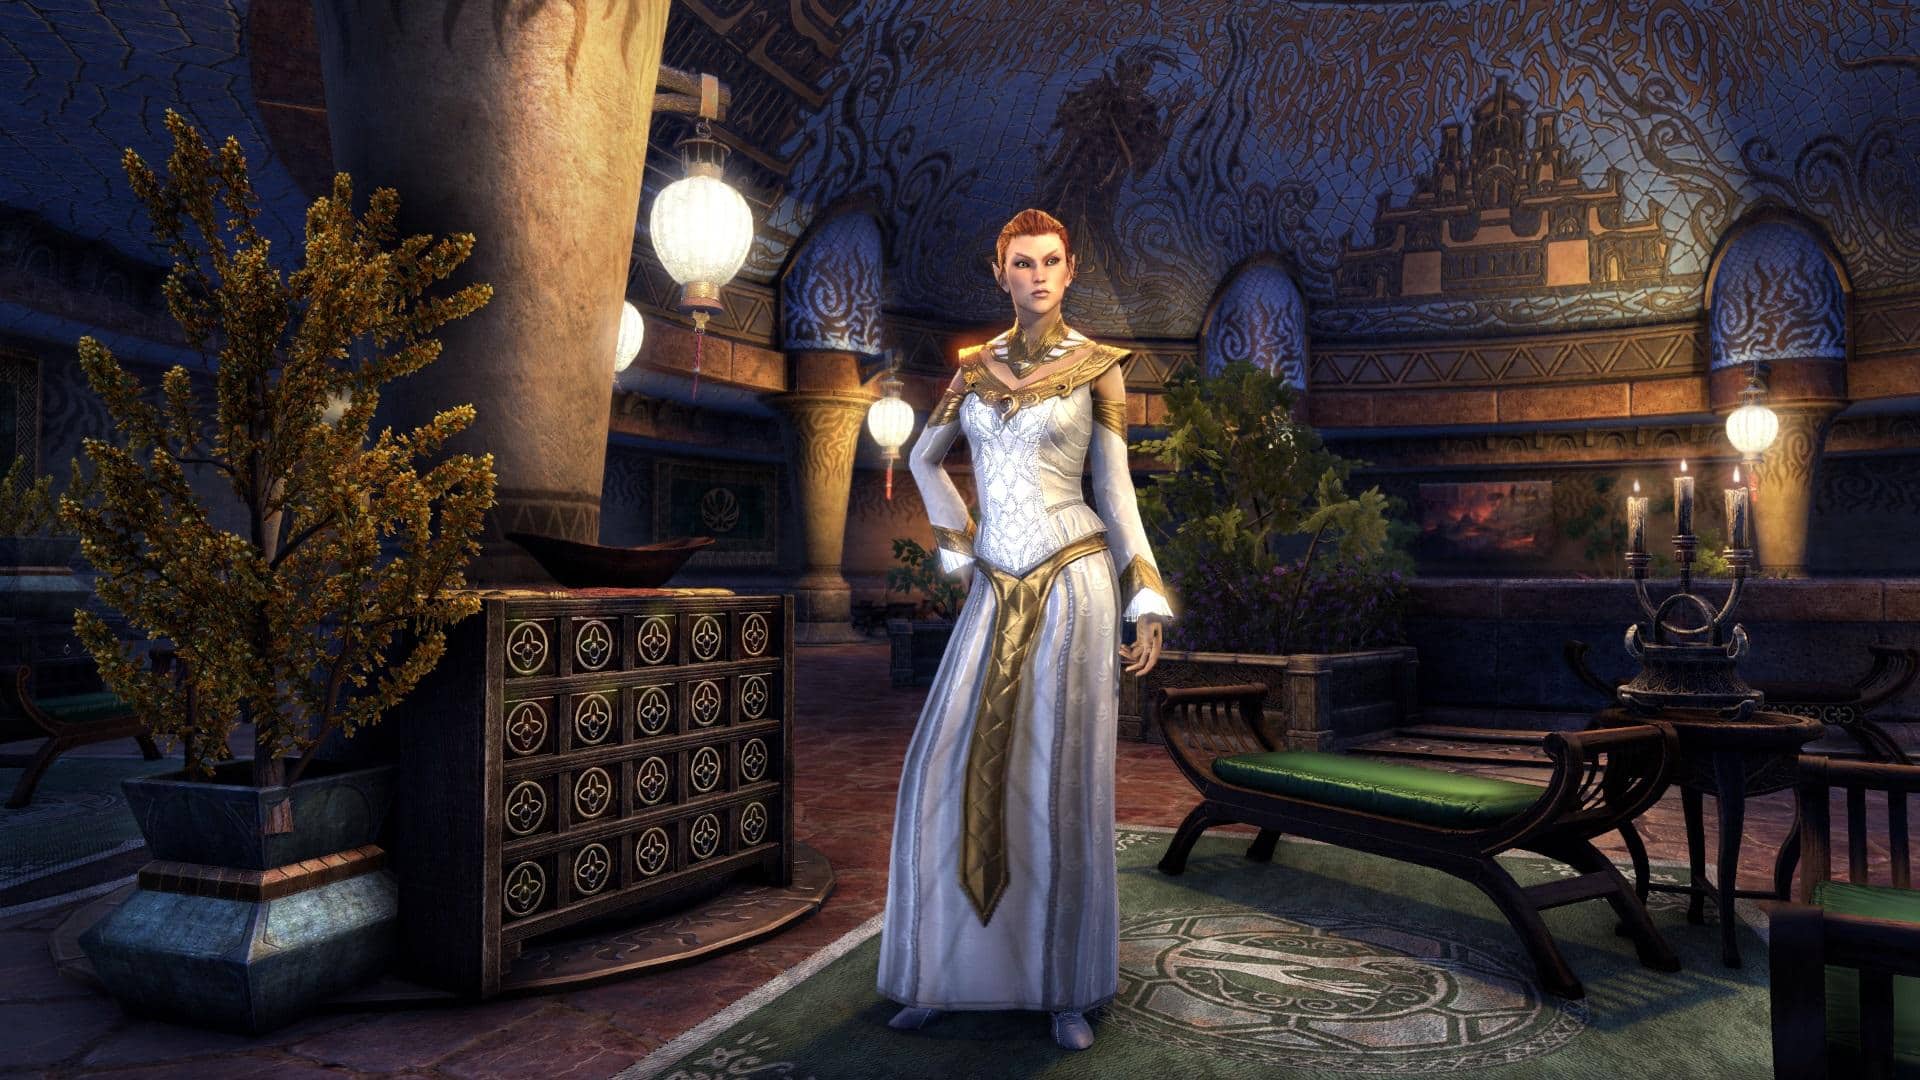 Tamriel Journal - Page 7 of 16 - Elder Scrolls Online Fansite & Community.  ESO News, Articles and Guides